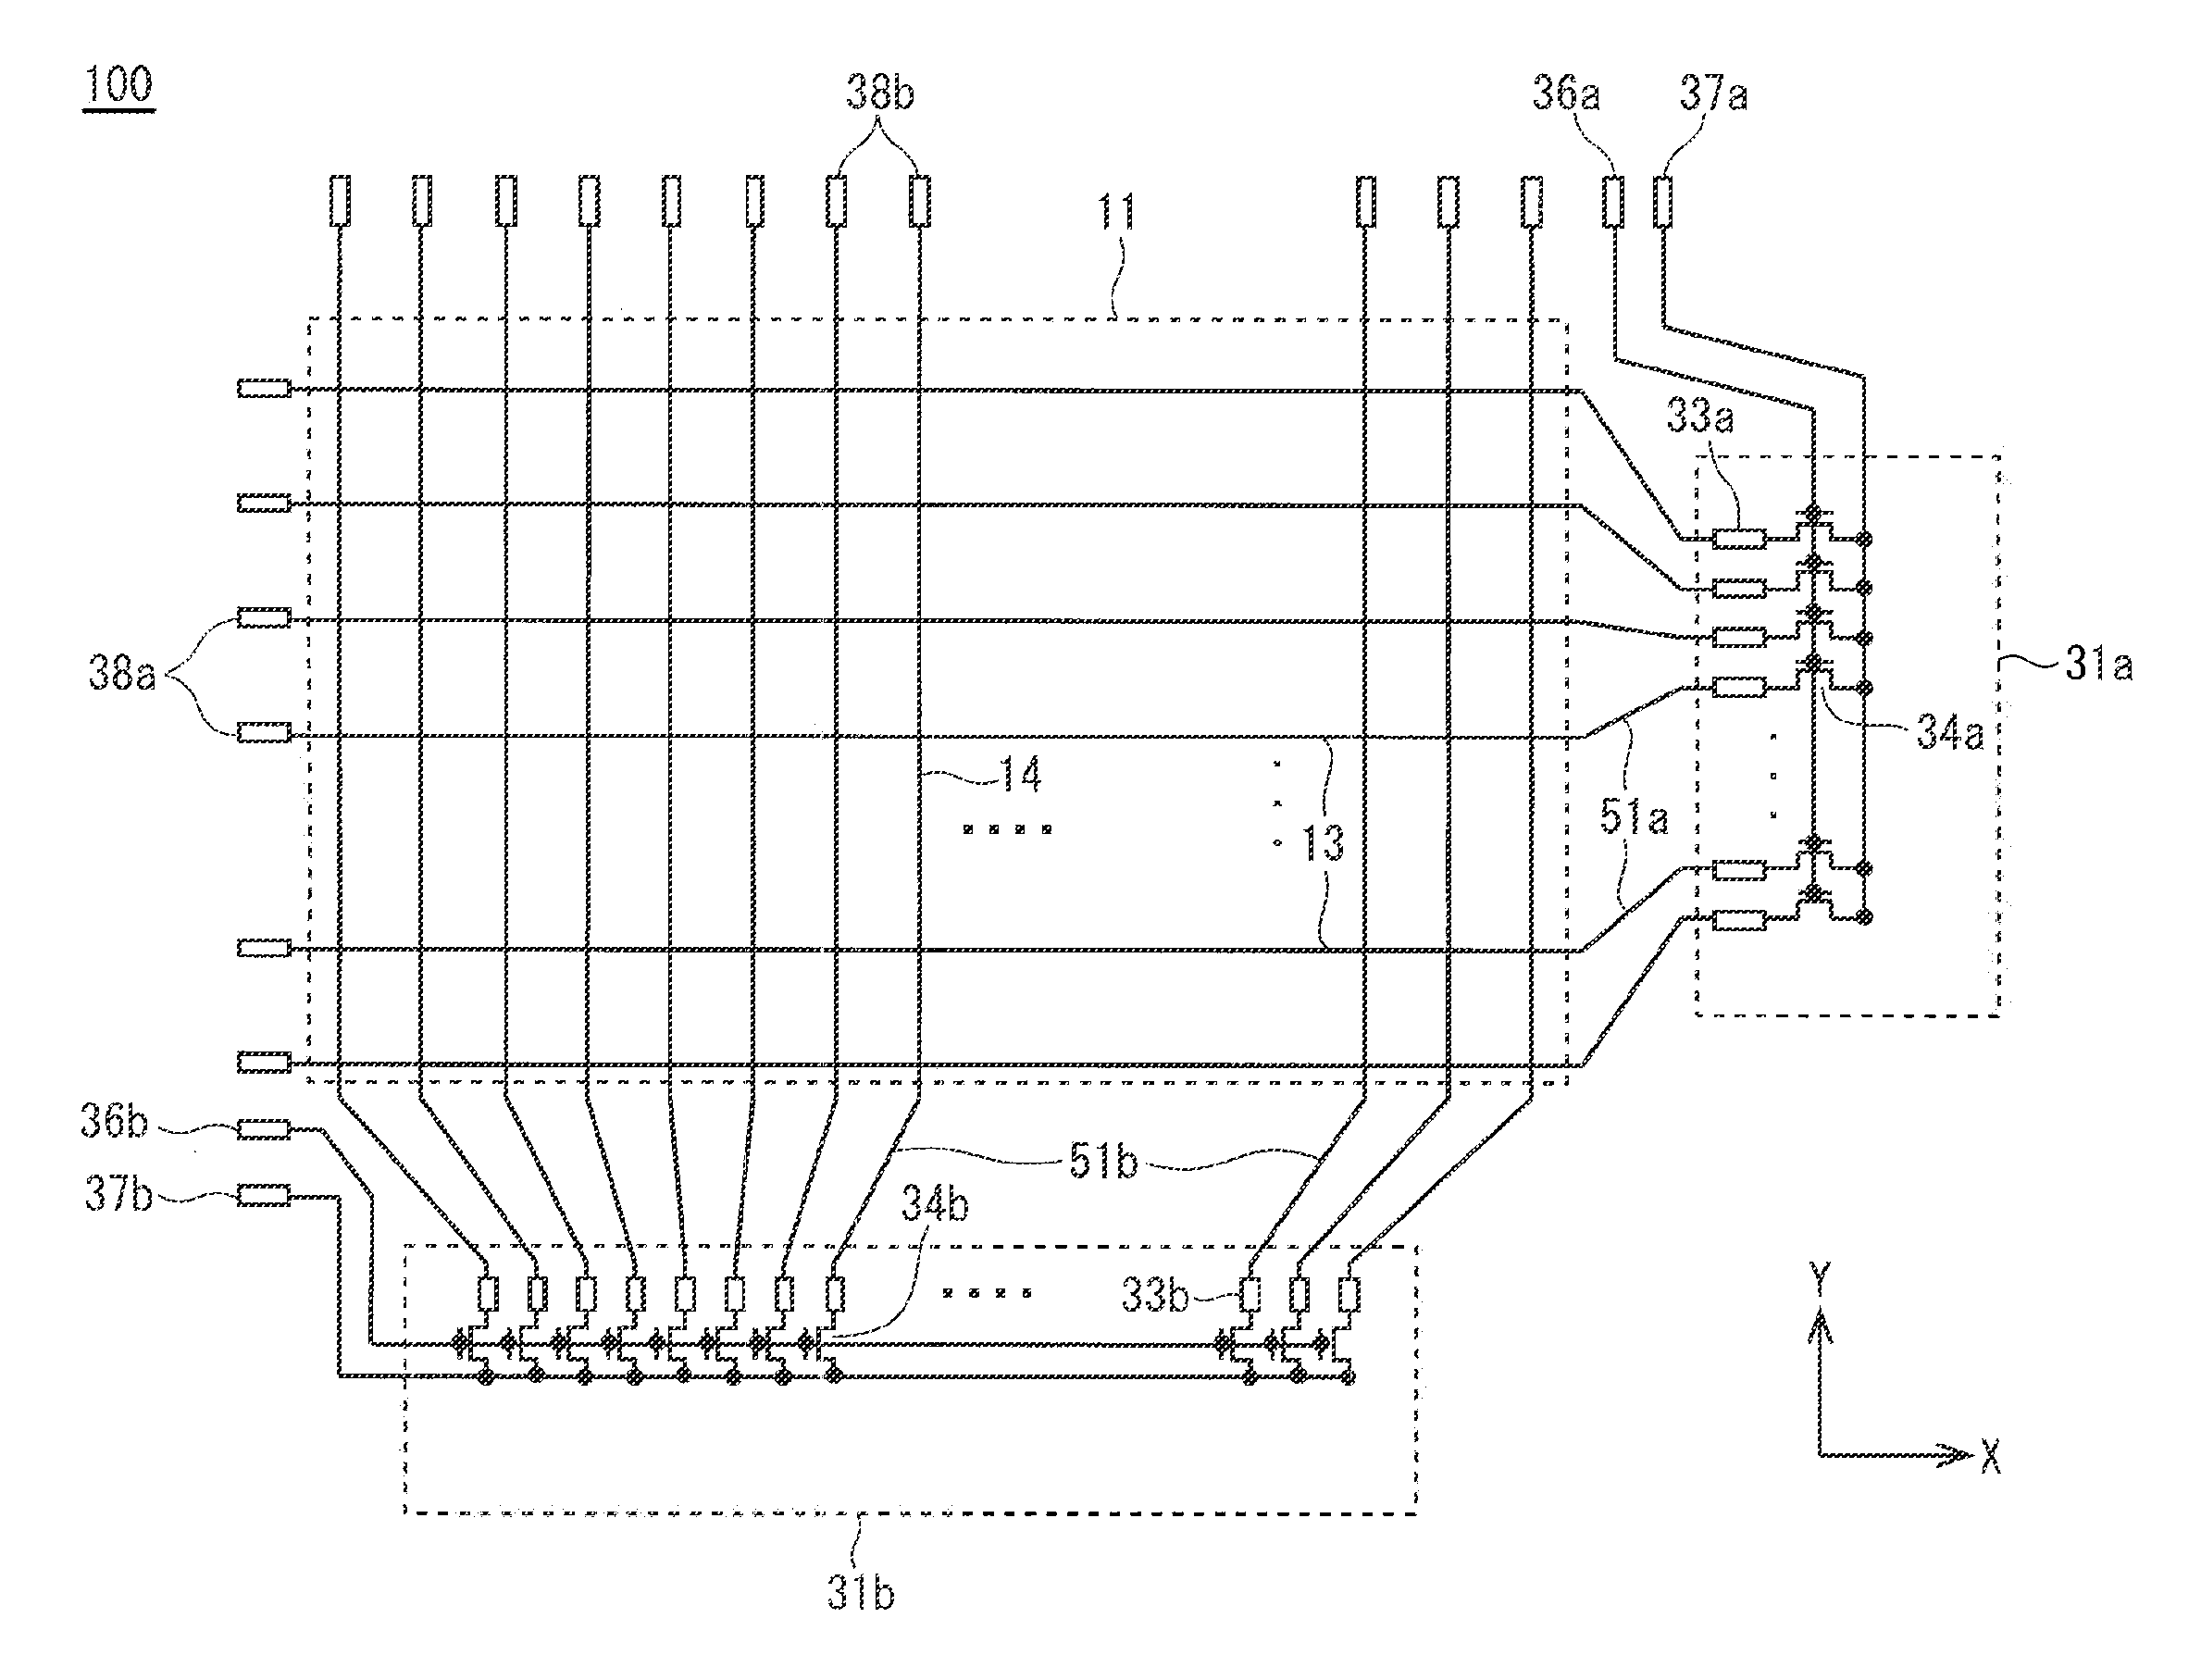 Array substrate, method of disconnection inspecting gate lead wire and source lead wire in the array substrate, method of inspecting the array substrate, and liquid crystal display device